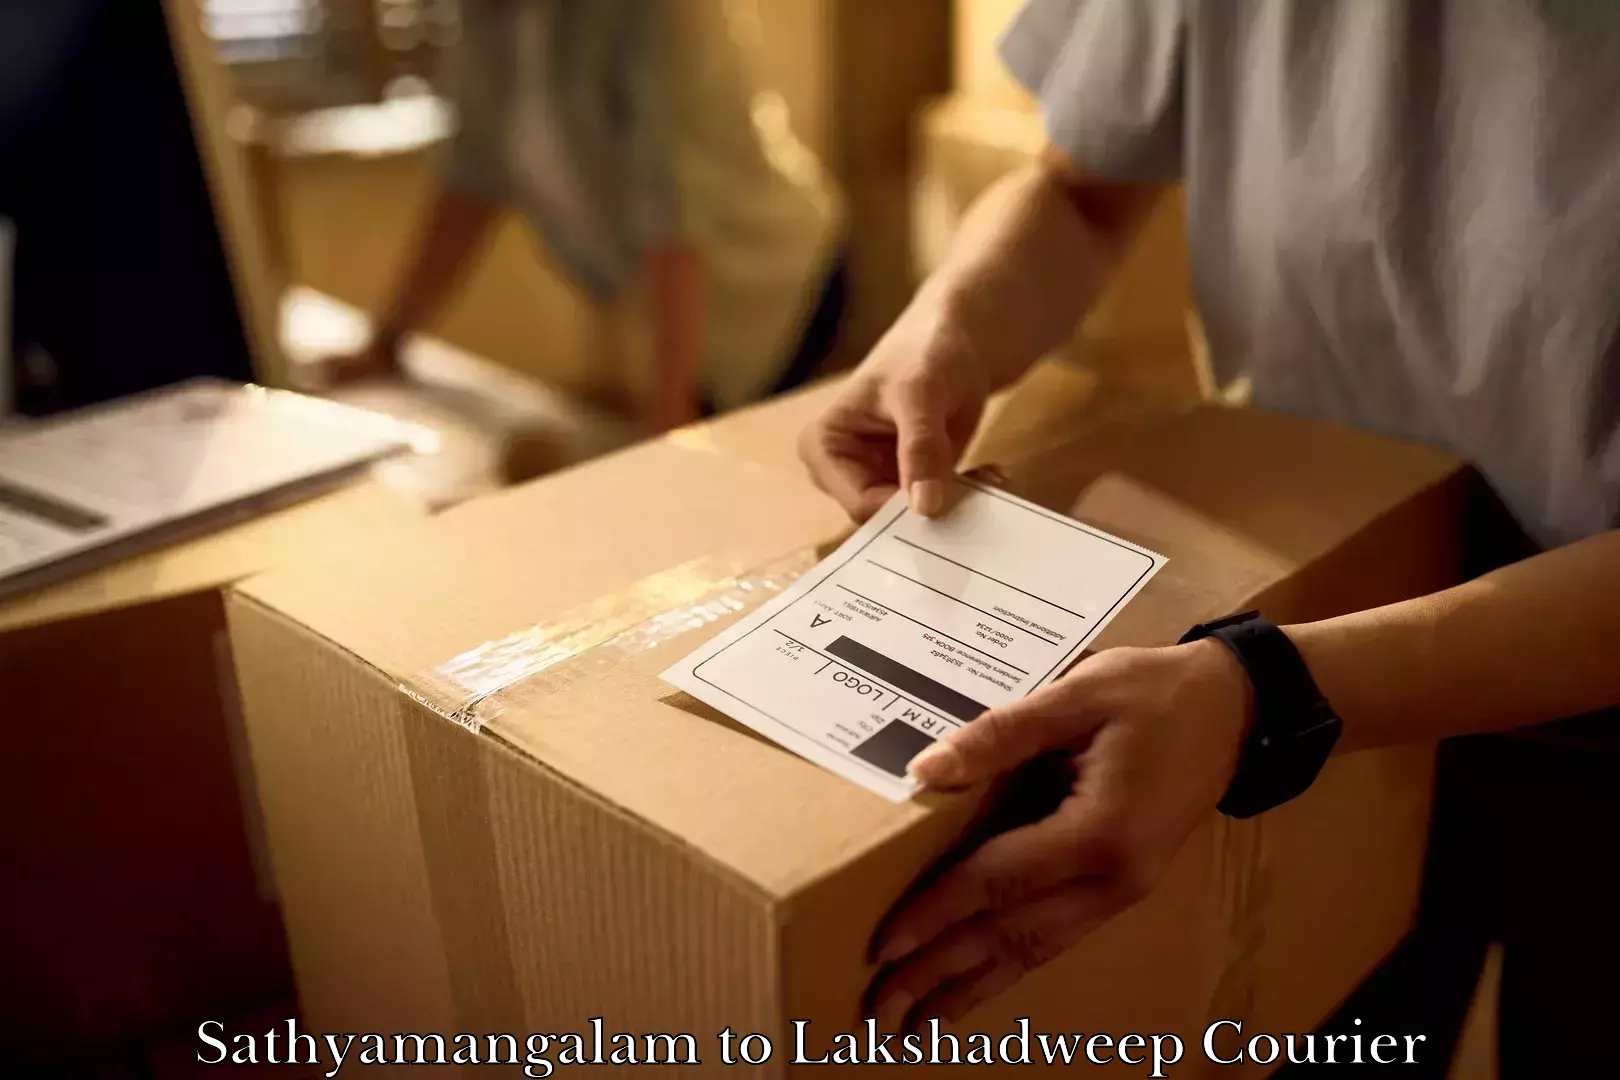 Efficient relocation services Sathyamangalam to Lakshadweep